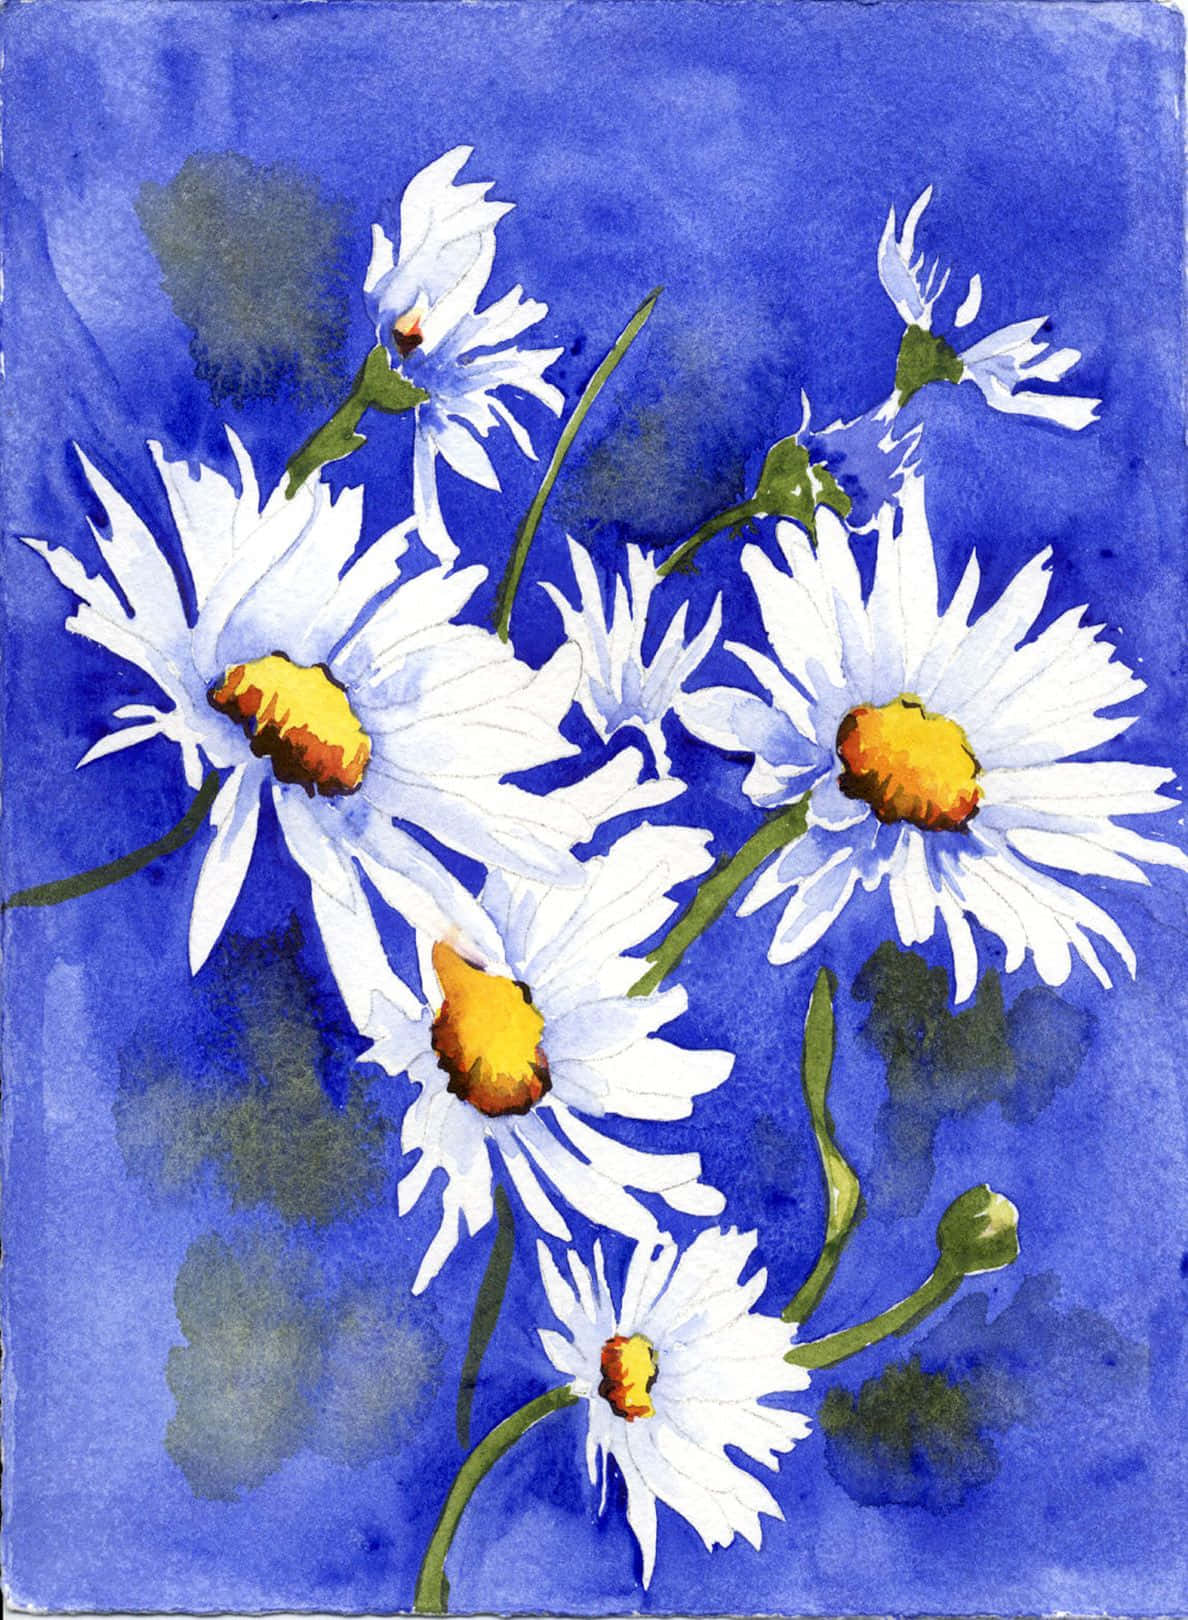 A Painting Of Daisies